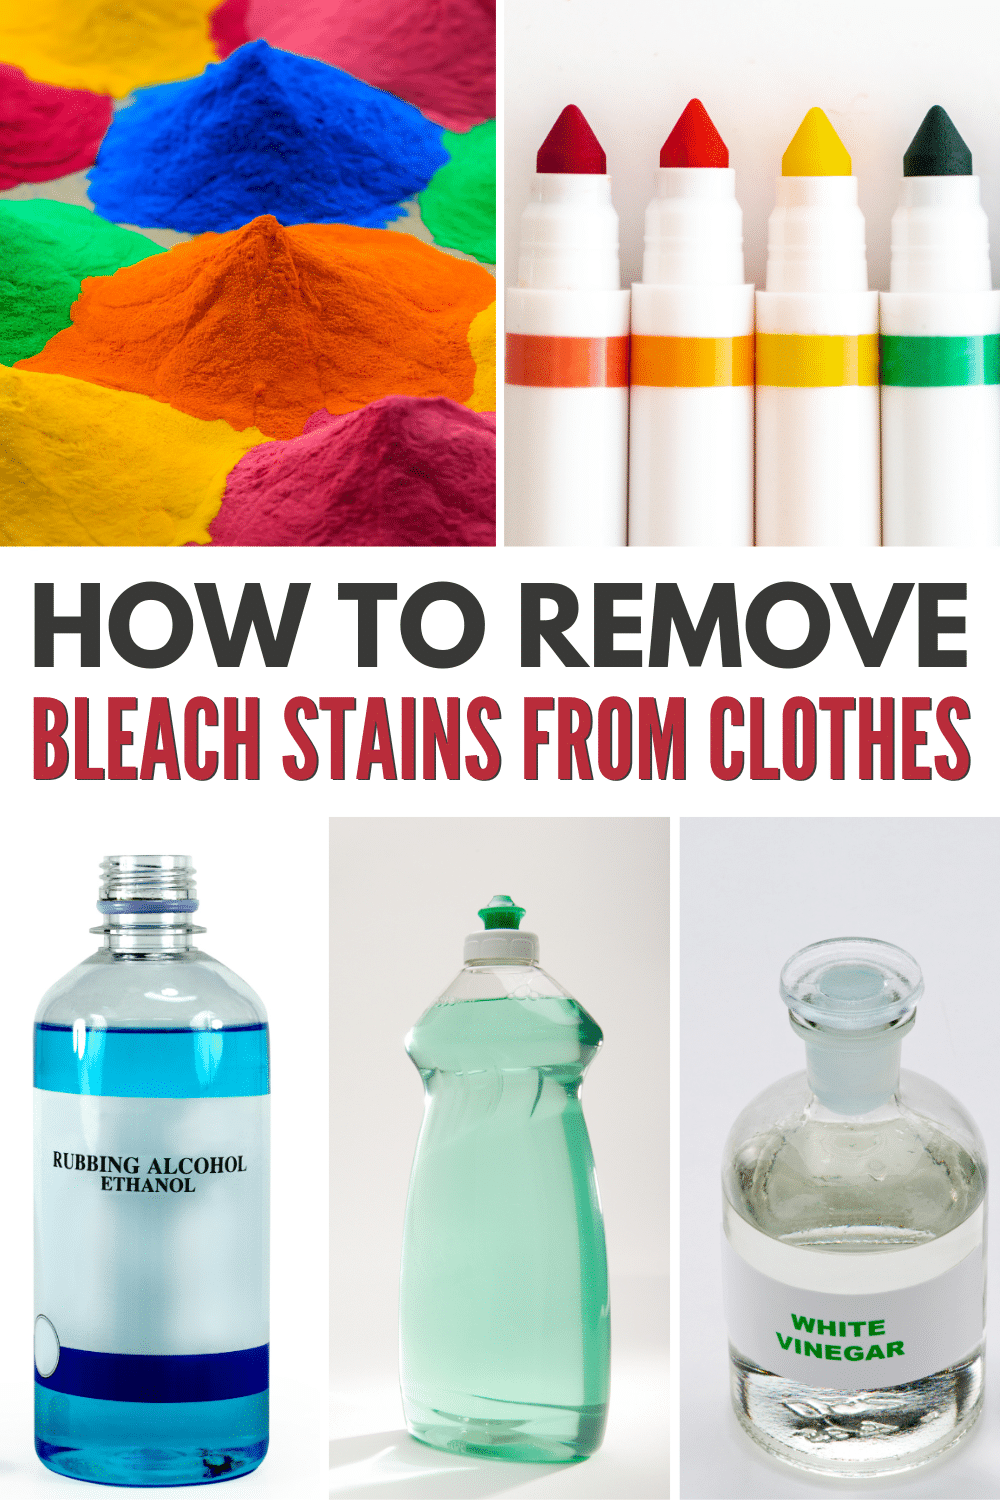 How to Remove Bleach Stains From Clothes: Step-By-Step Guide